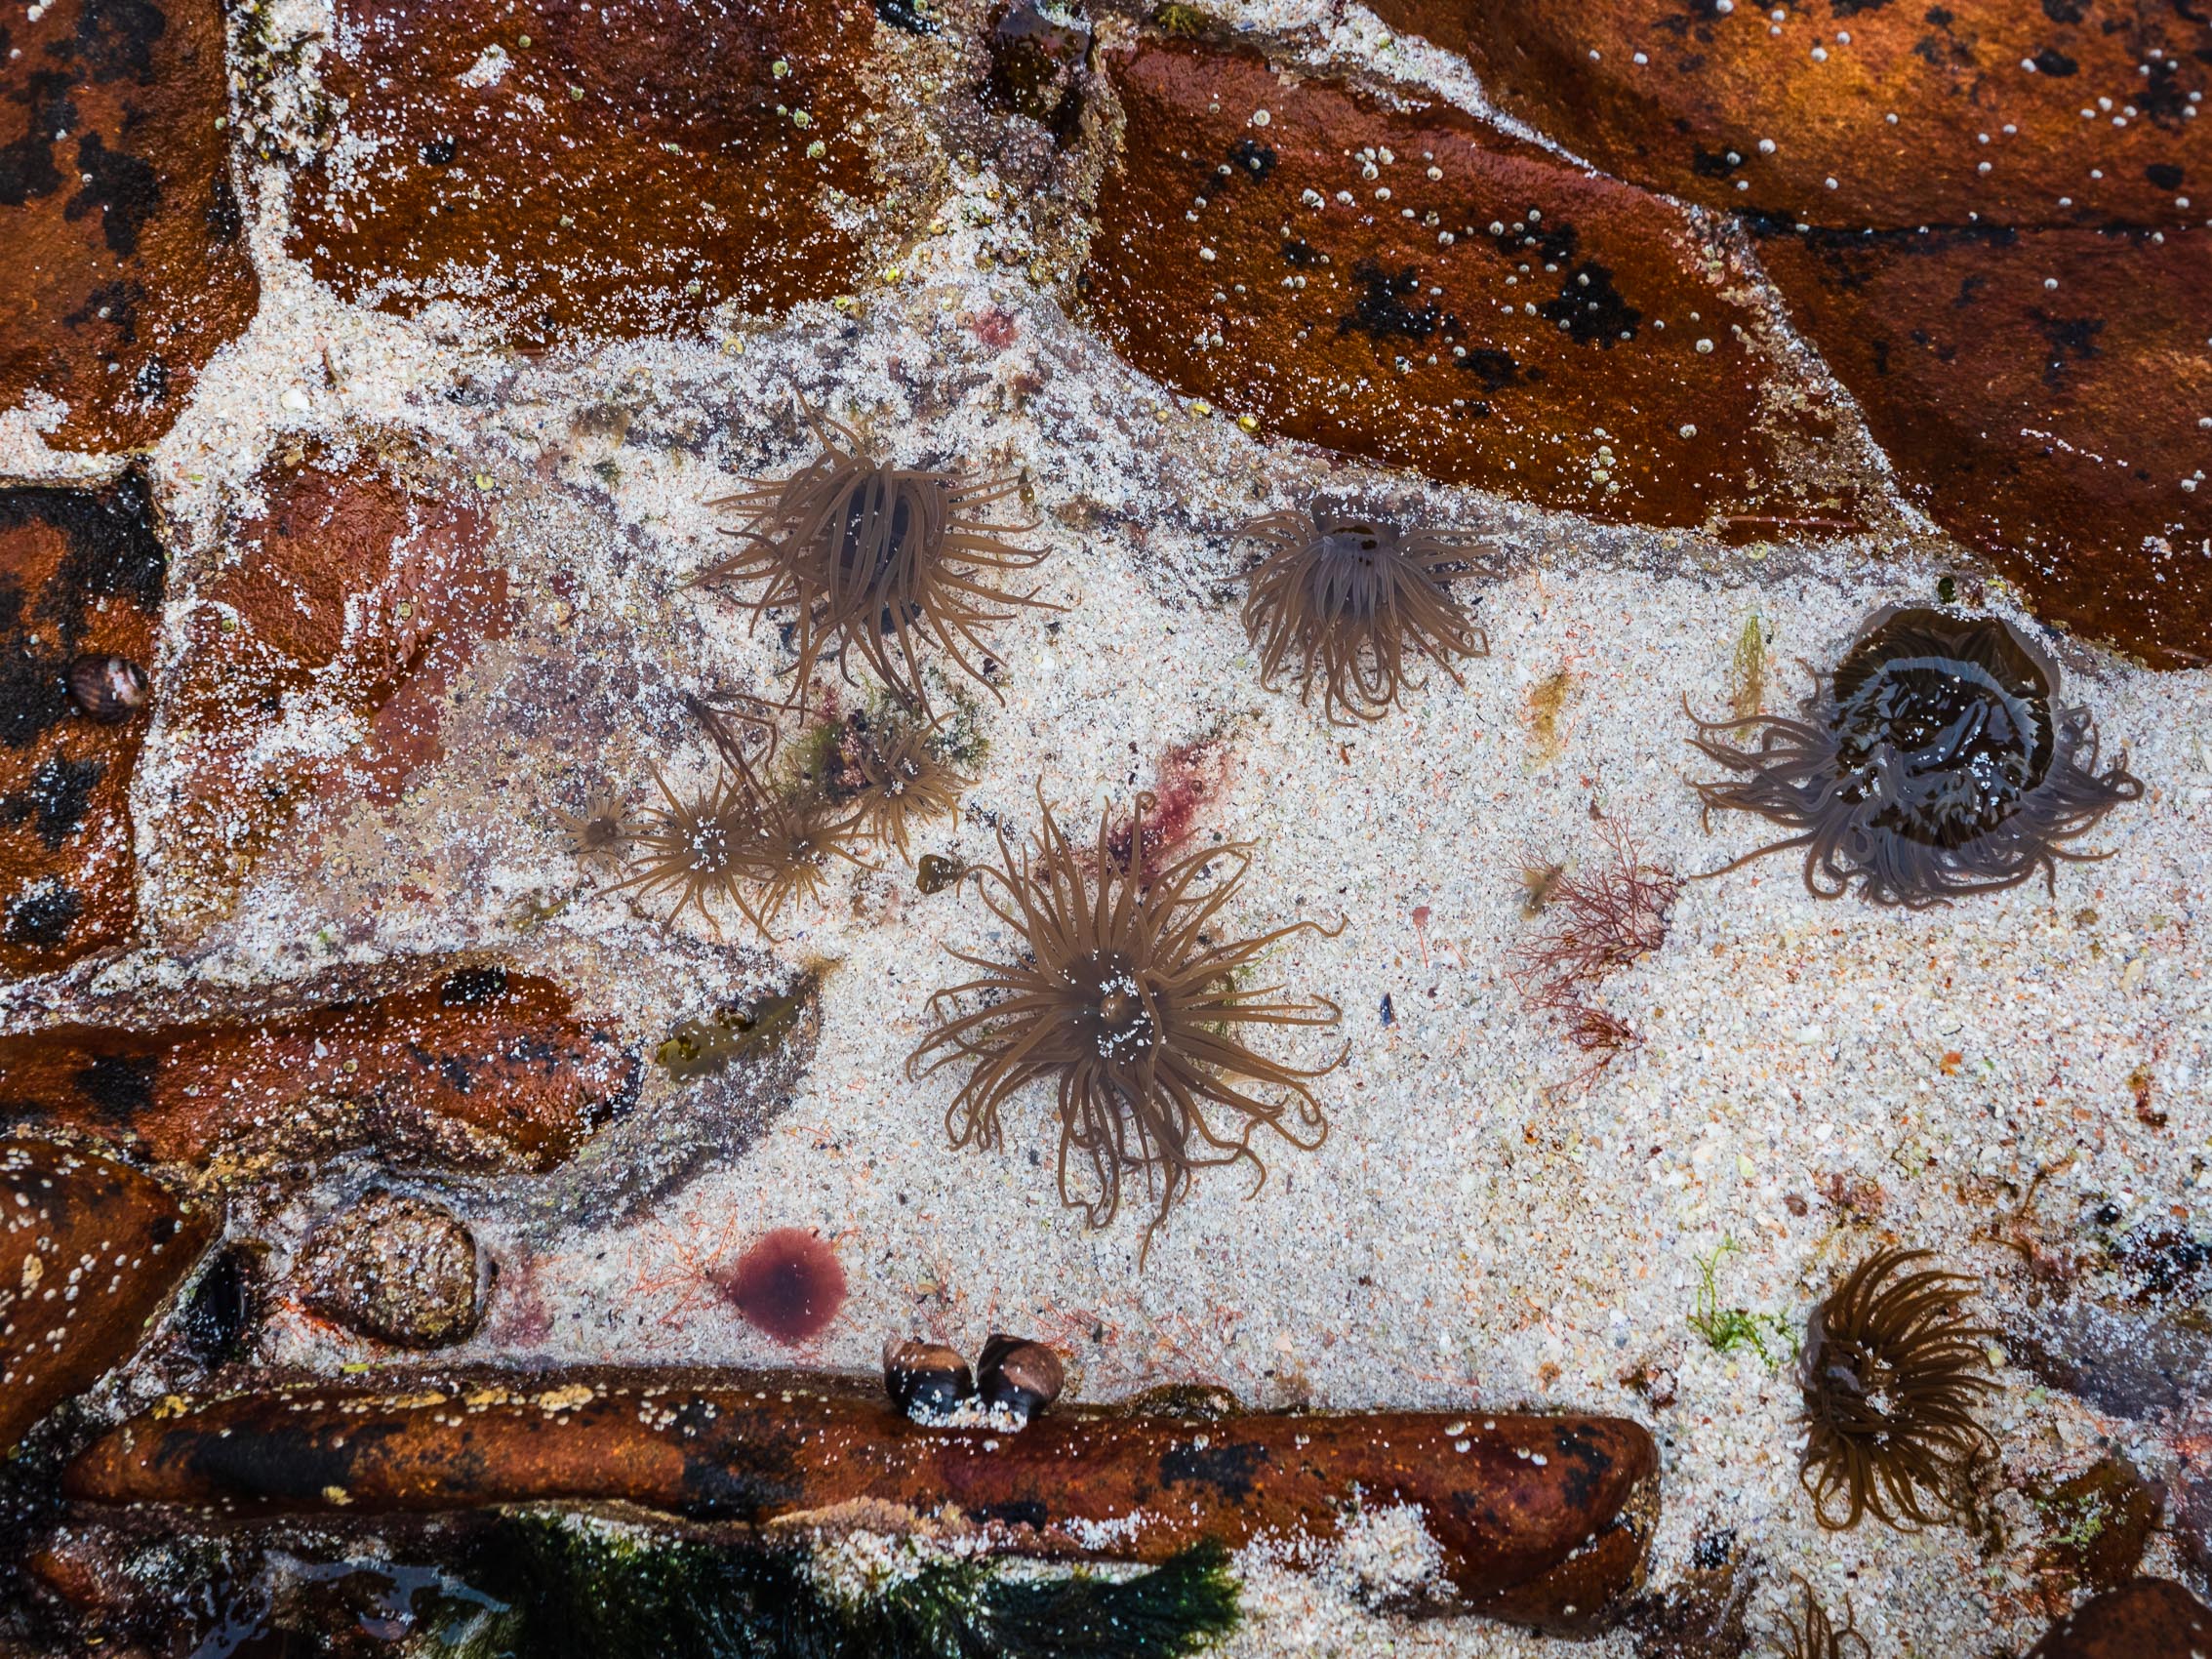 Sea anenomes in a rock pool at Coille Ghillidh, Applecross, Scotland. AP027